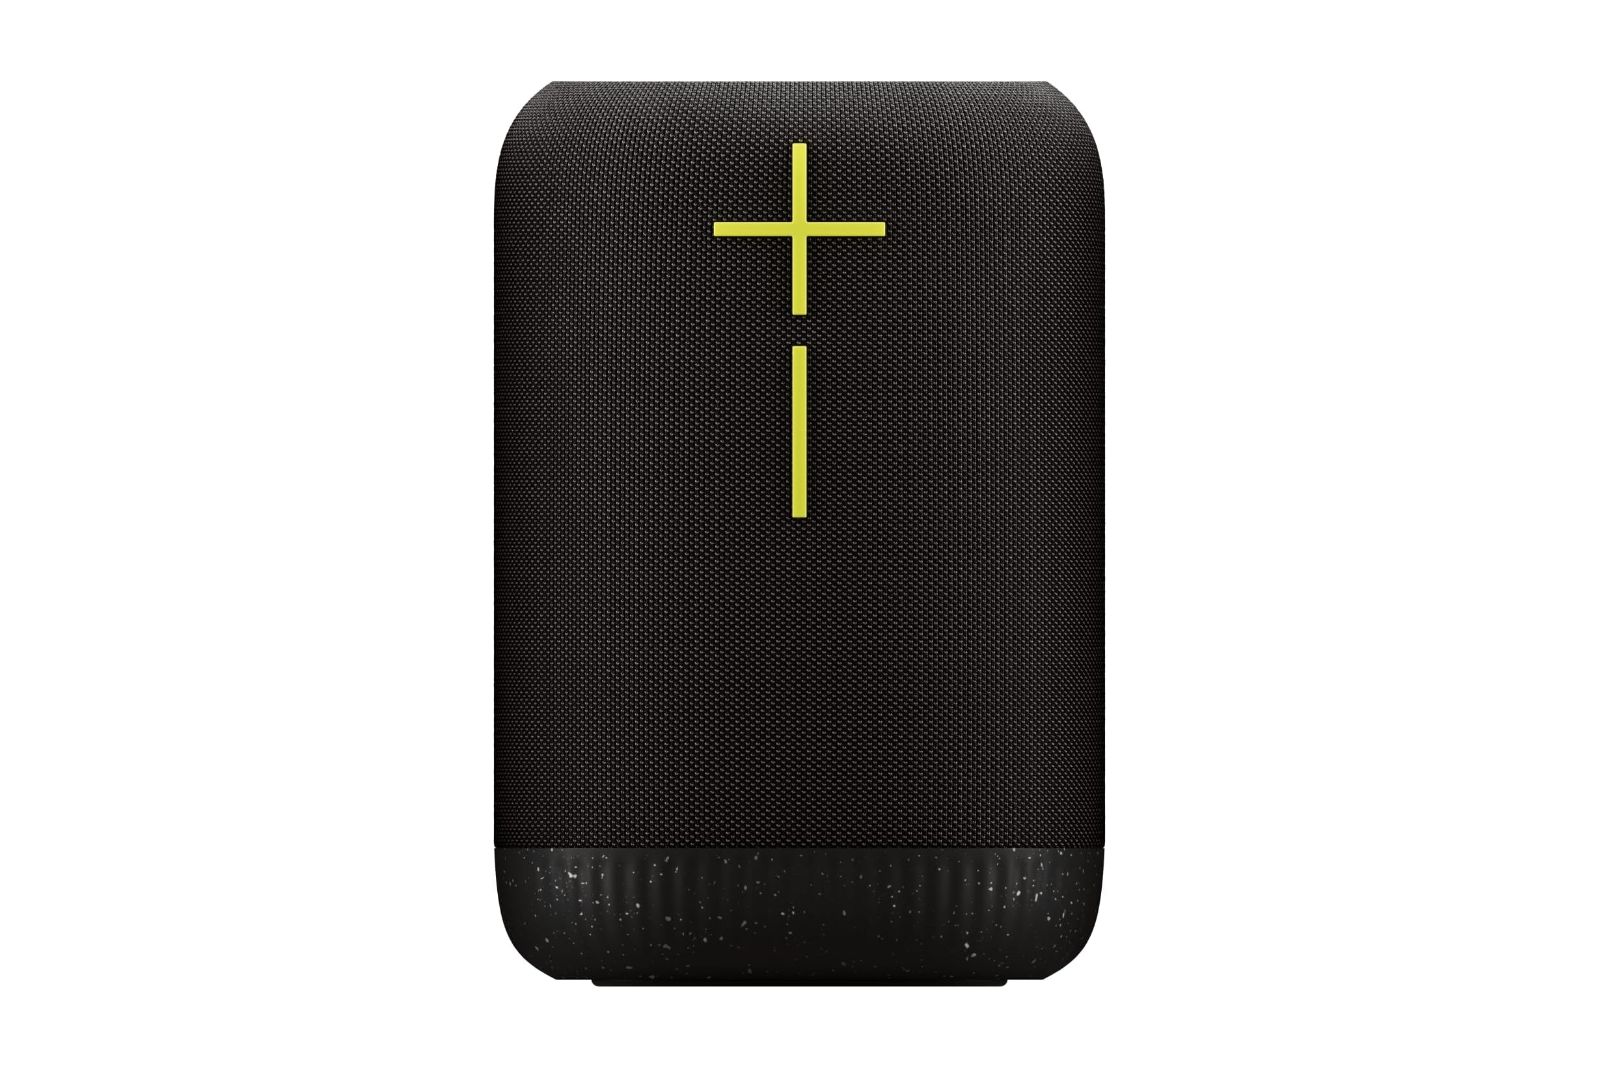 A rounded rectangular black speaker with giant yellow volume control buttons.